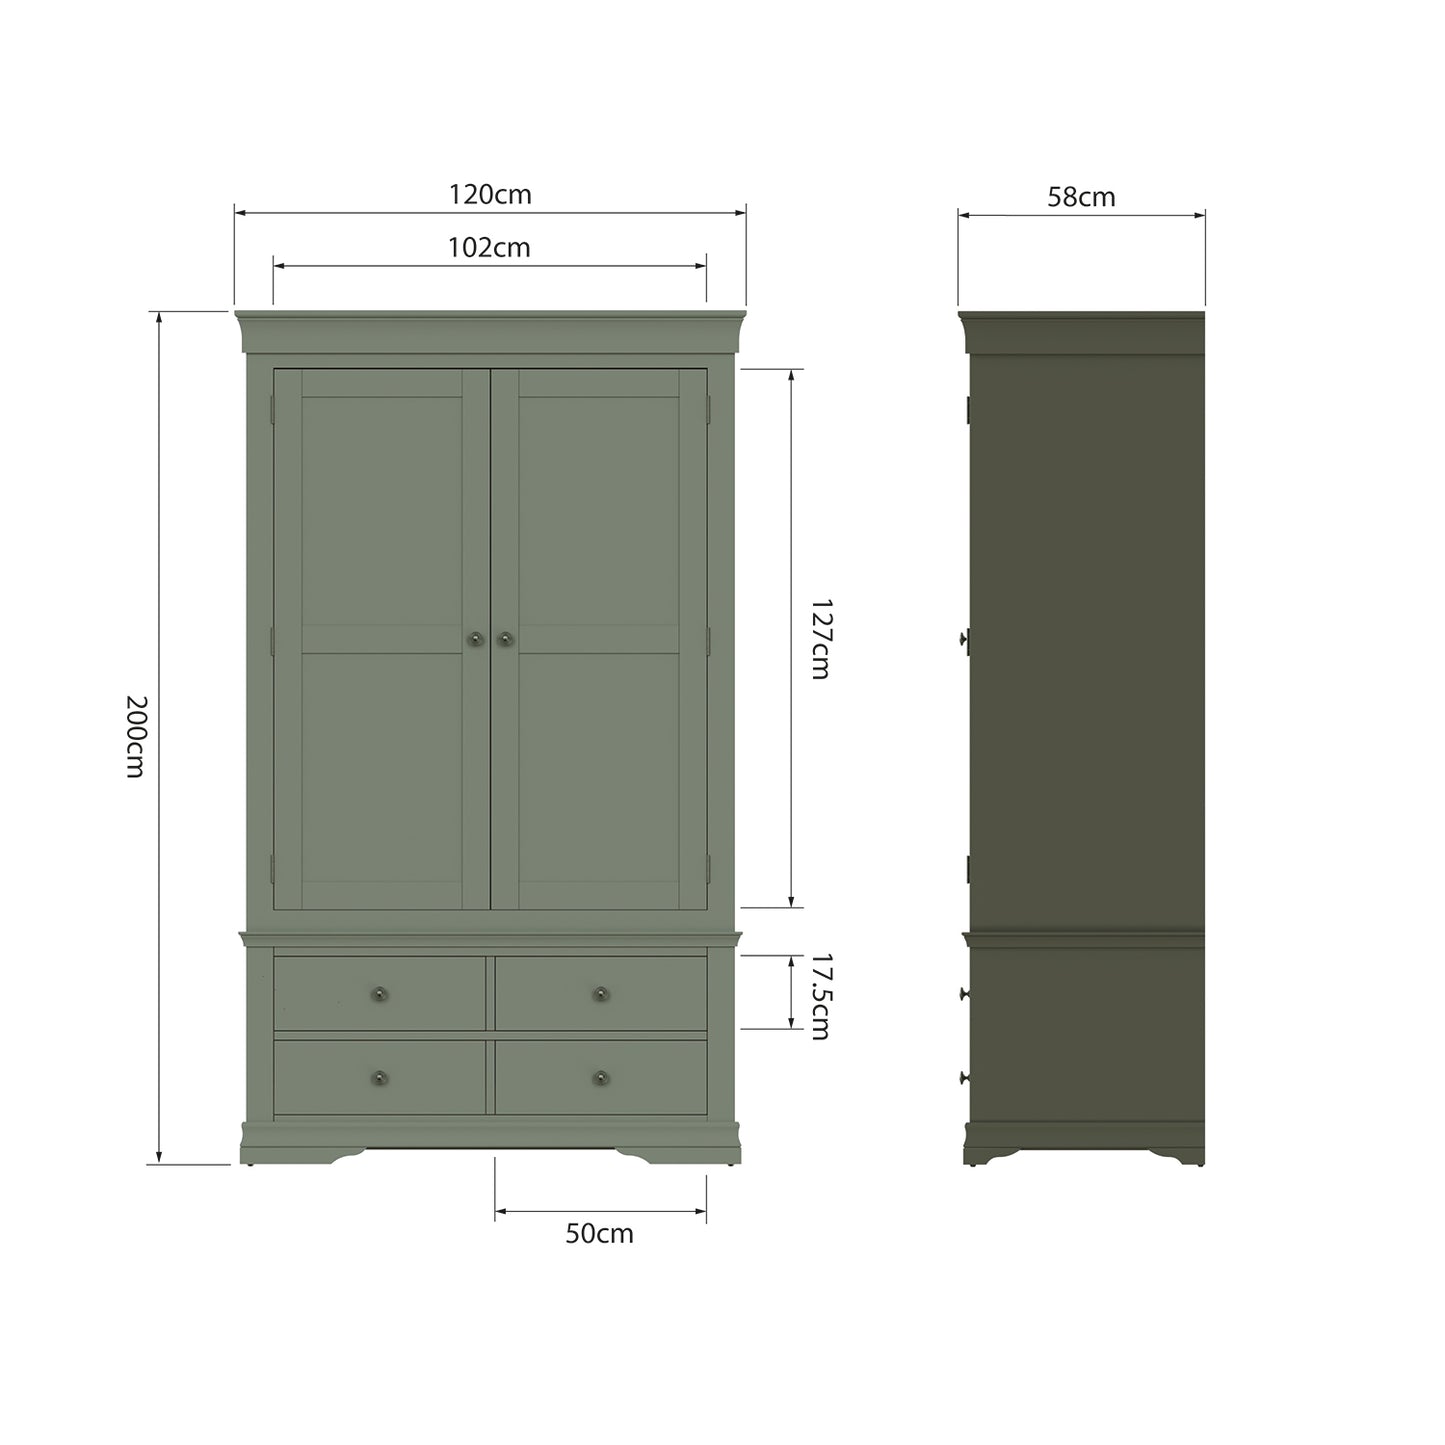 Measurements Of Toulouse Olive Wardrobe